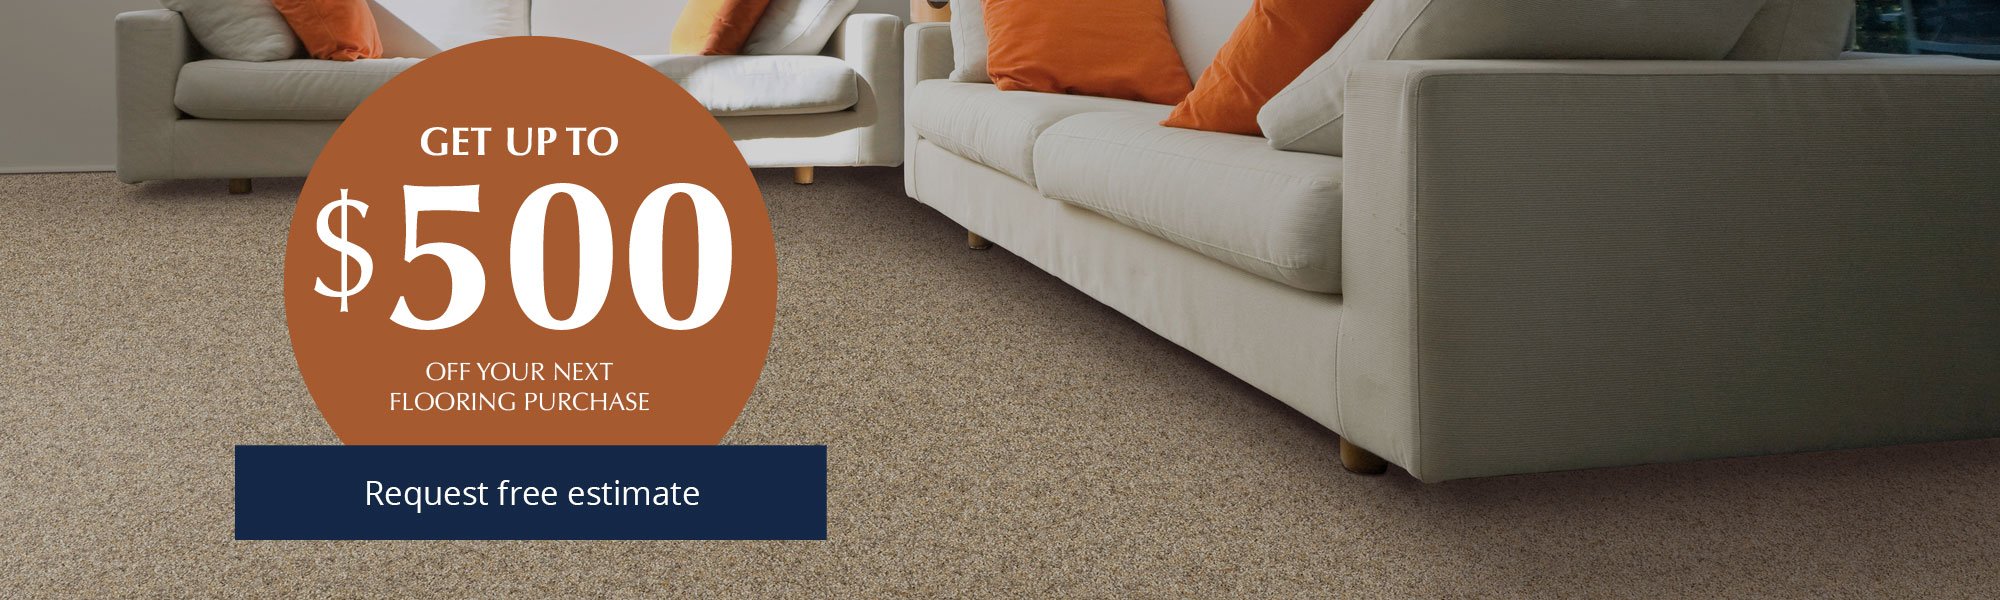 Get up to $500 off your next flooring purchase - request a free estimate today!